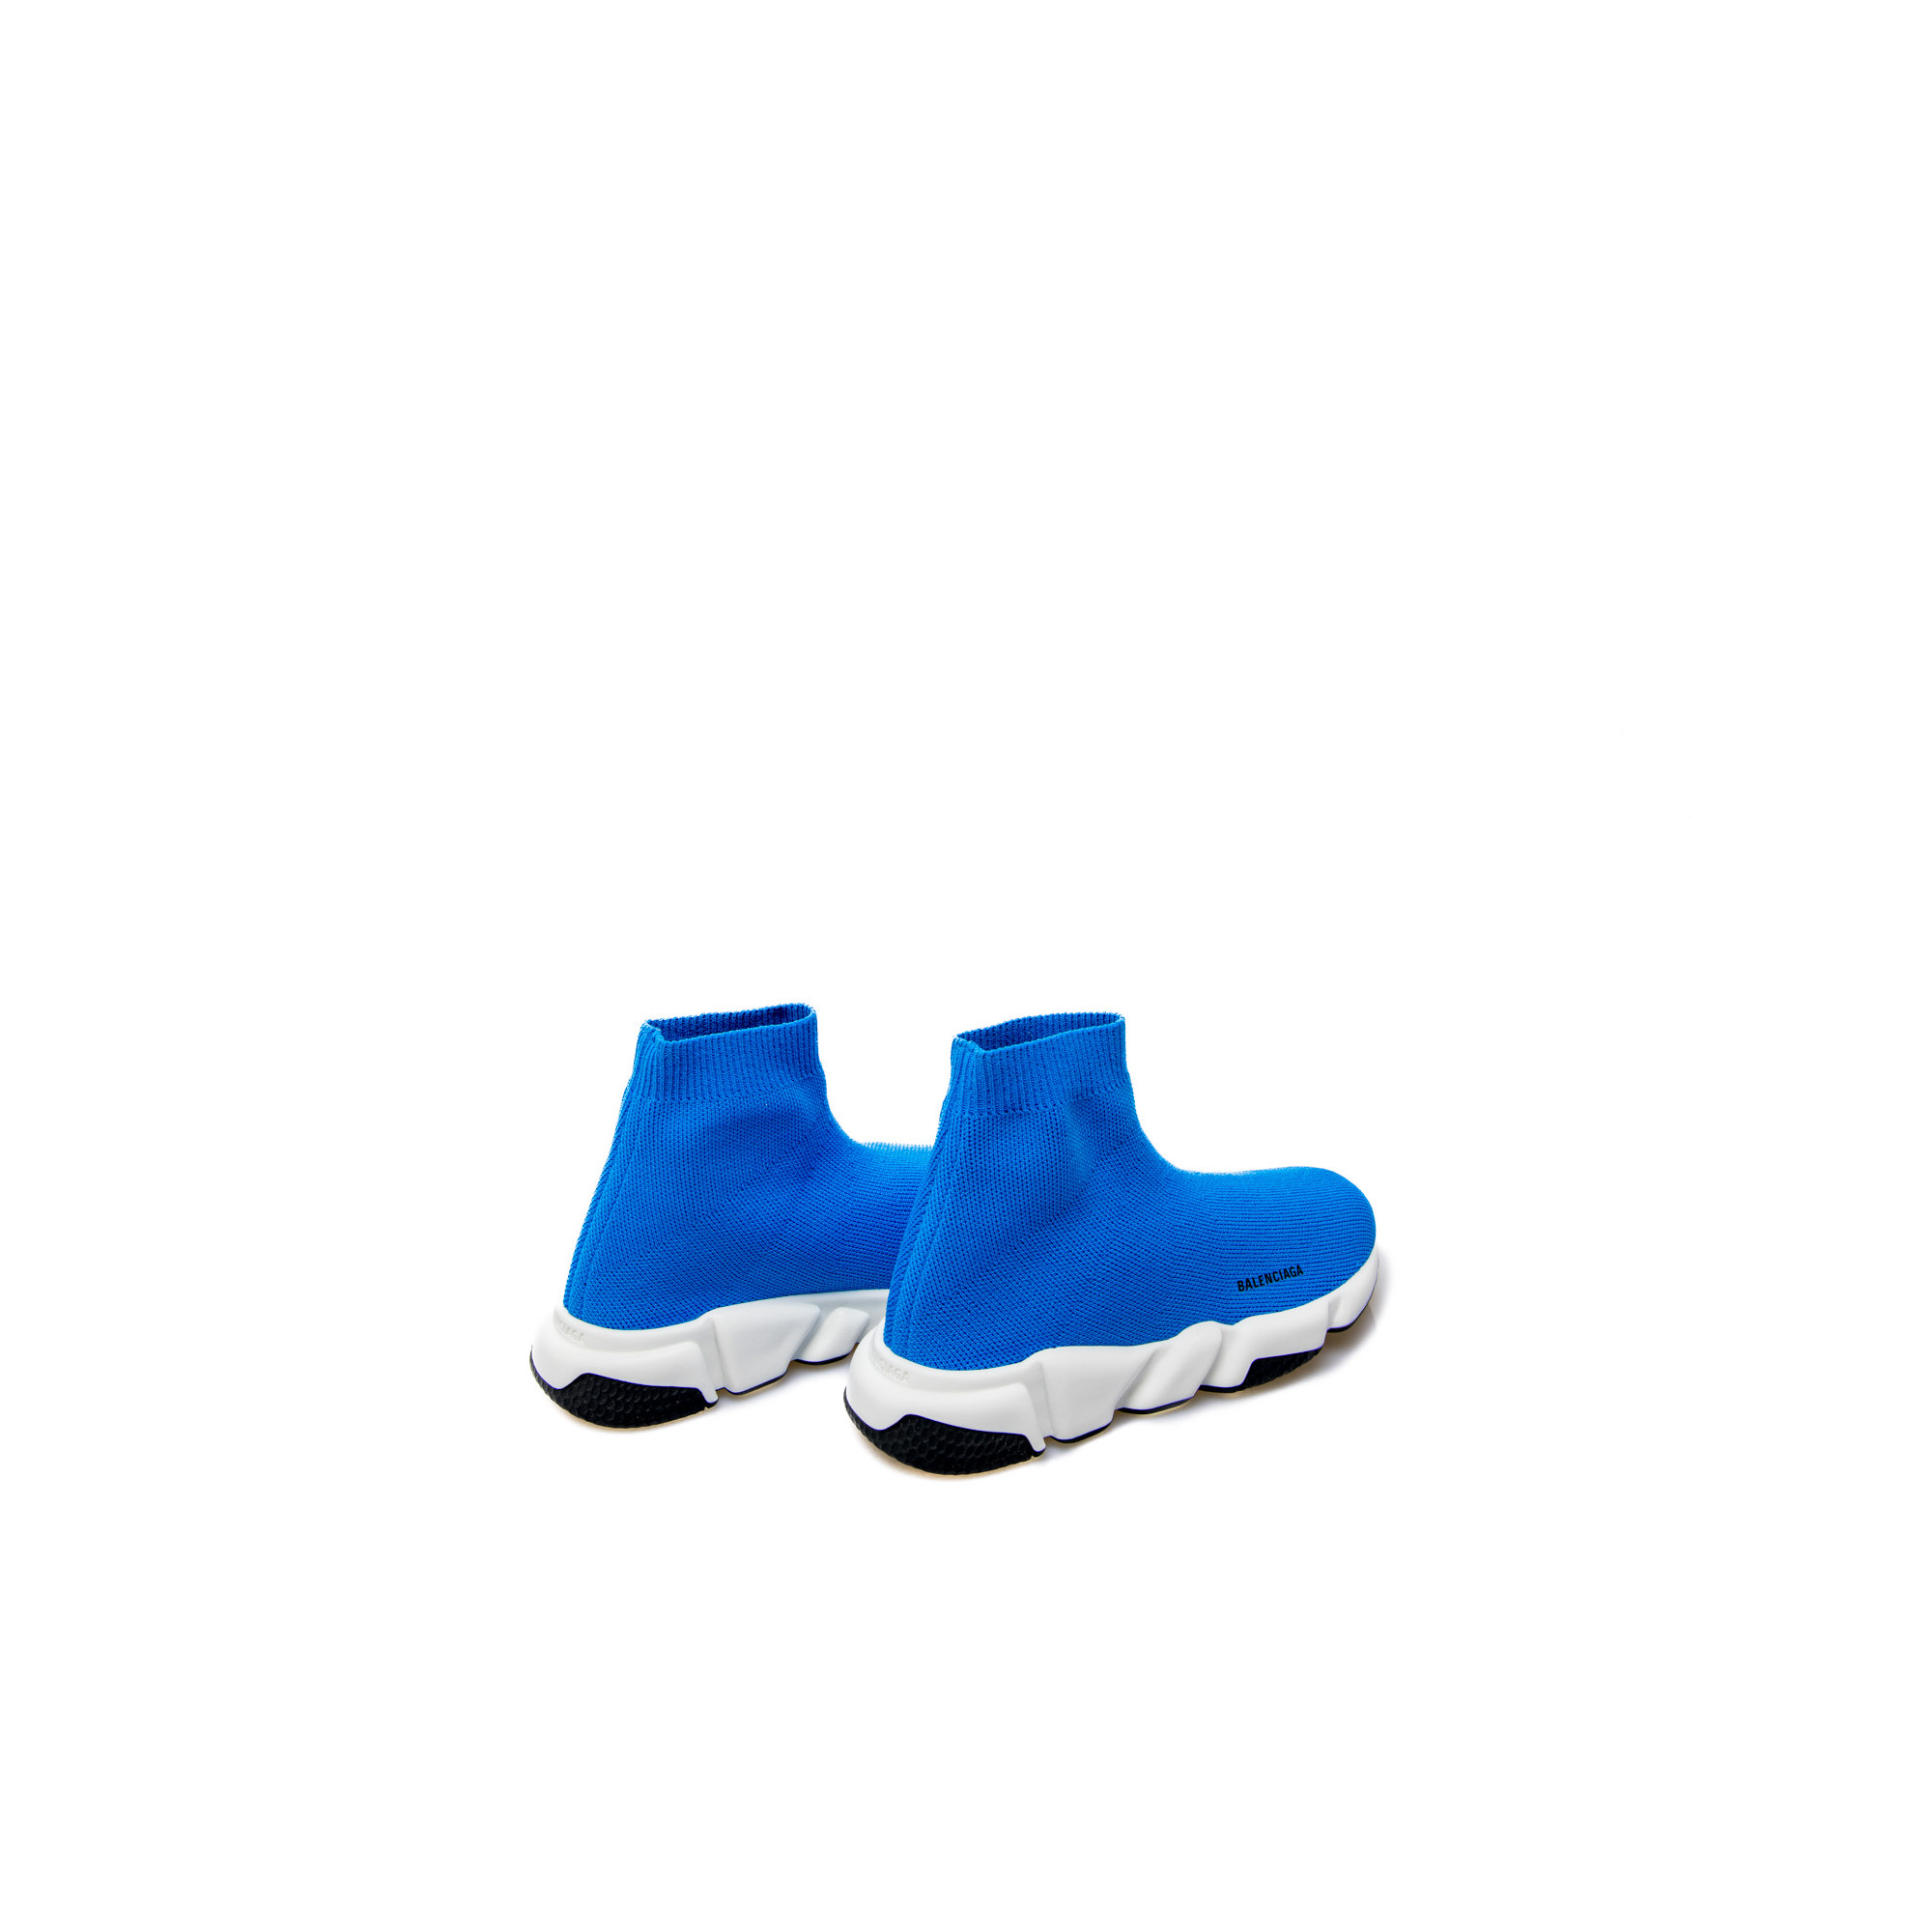 New Colorways Of The Balenciaga Speed Trainer Are Available Now For  PreOrder  SneakerNewscom